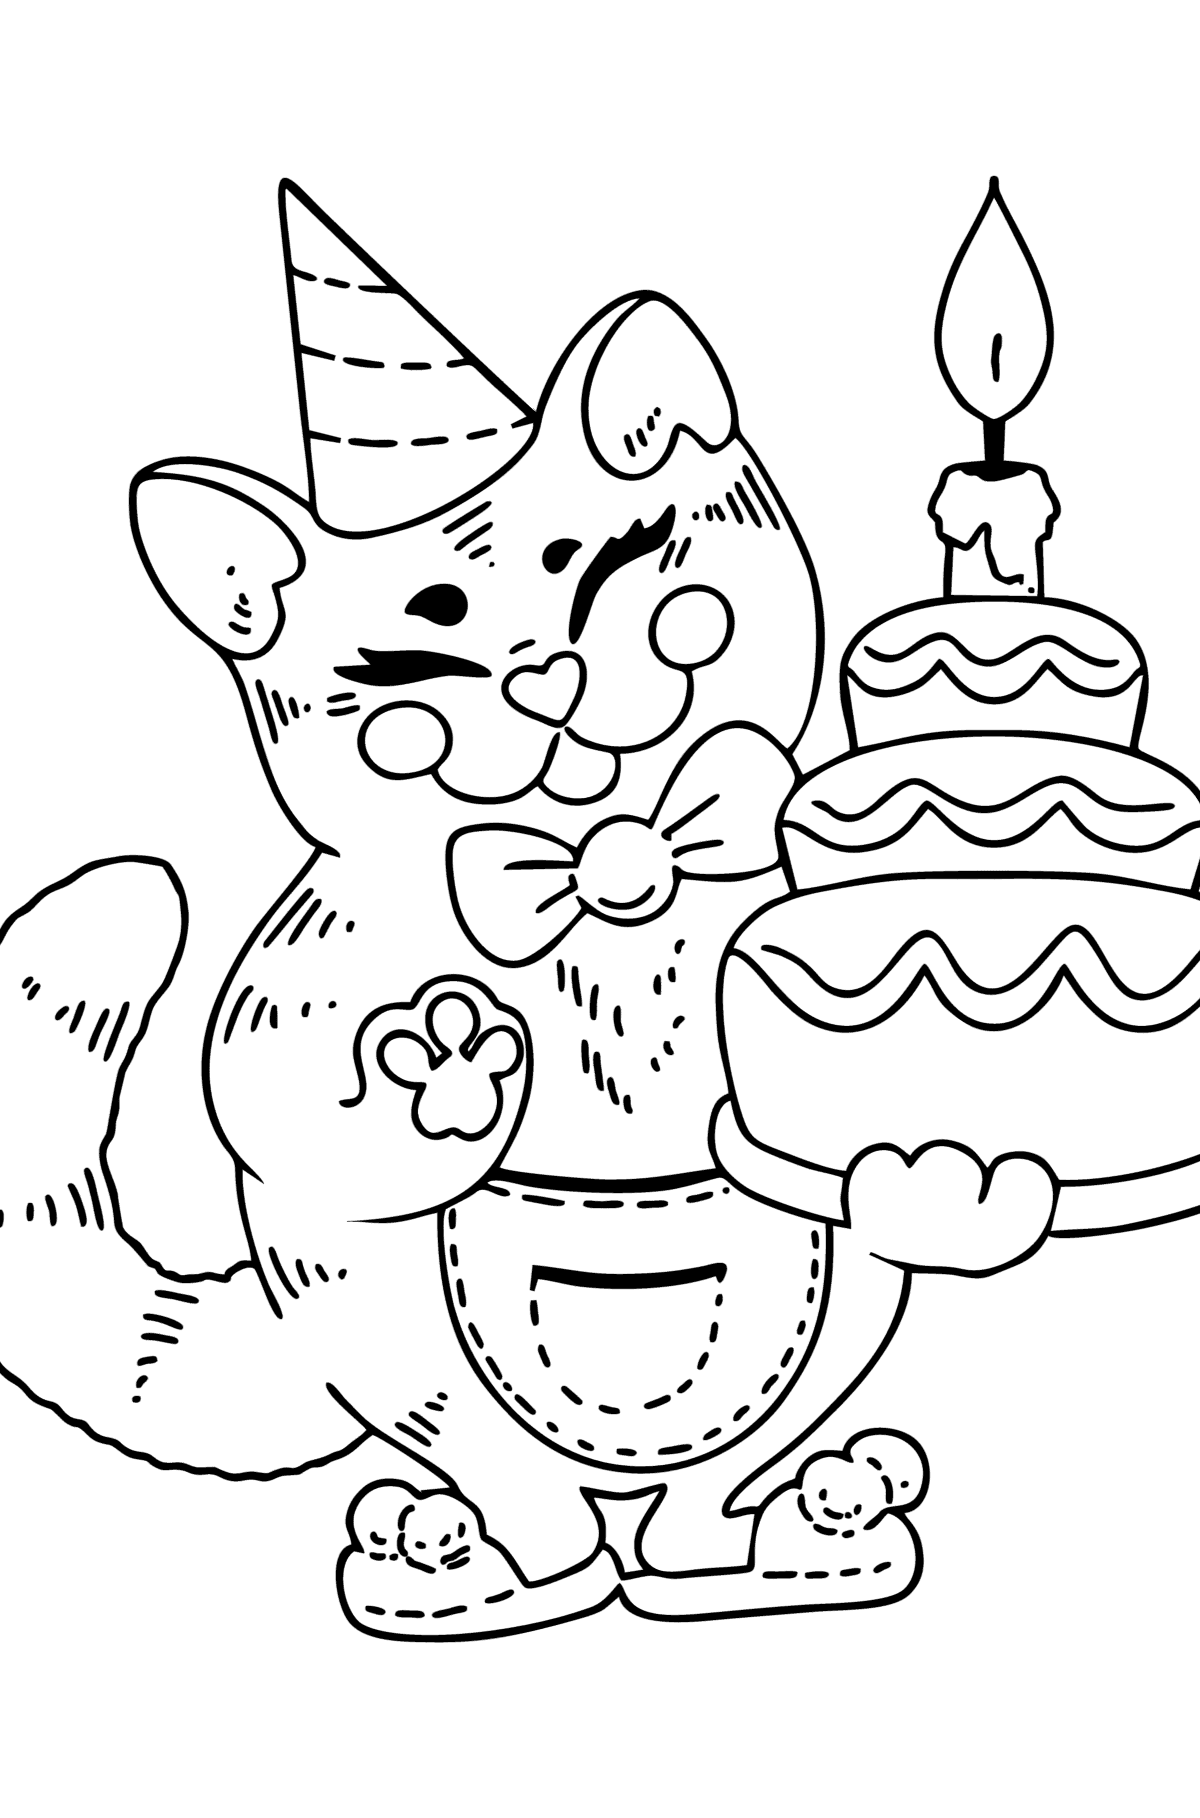 Cat Birthday coloring page - Coloring Pages for Kids